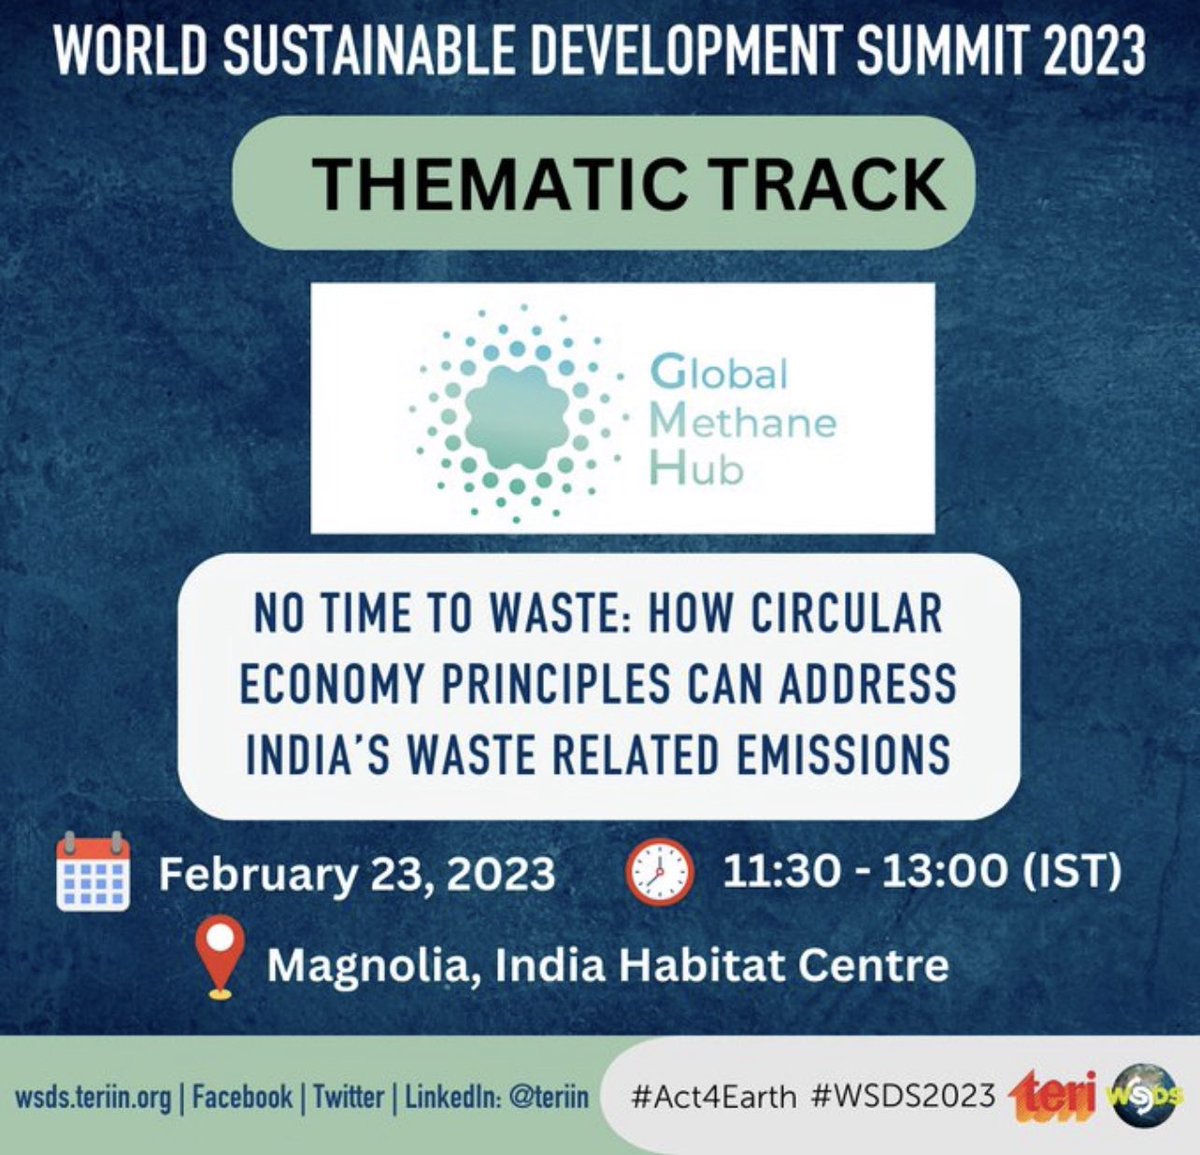 Spoke on the initiatives for Garbage-Free Cities at the #WSDS2023 organised by @teriin. 
#UnionBudget2023 emphasises on scientific processing of waste to tap circular economy. 
A TERI report pegs impact of #SBM to reduce GHG emissions by 100 million tonnes.
#Act4Earth